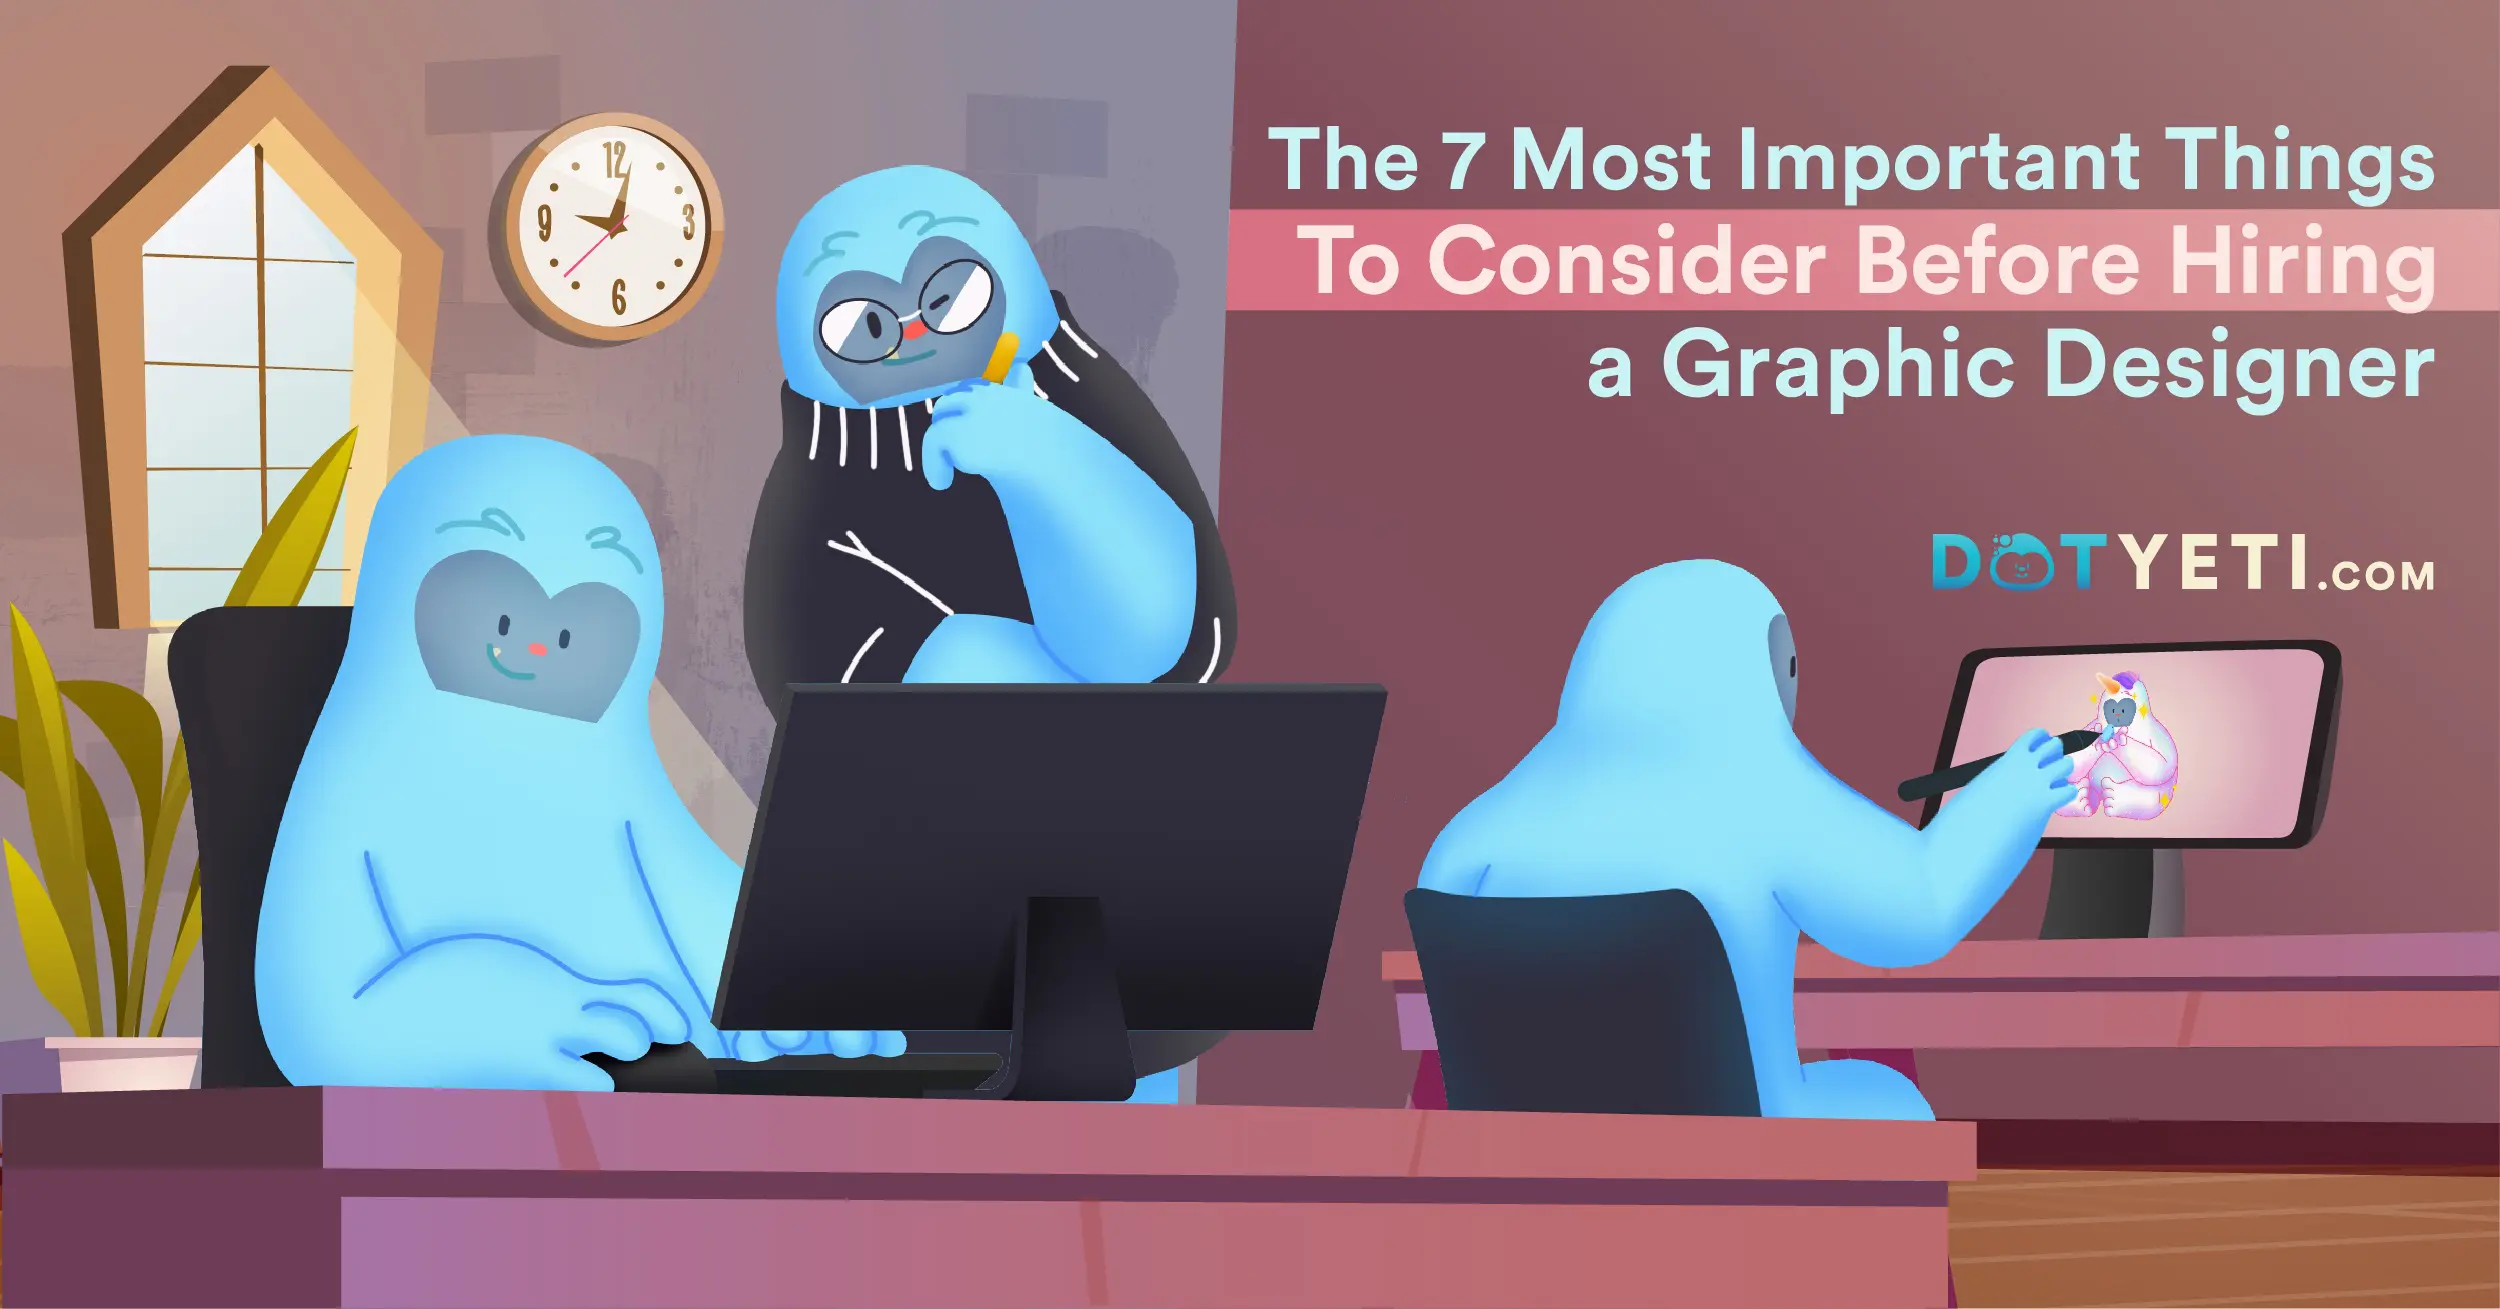 The 7 Most Important Things To Consider Before Hiring A Graphic Designer